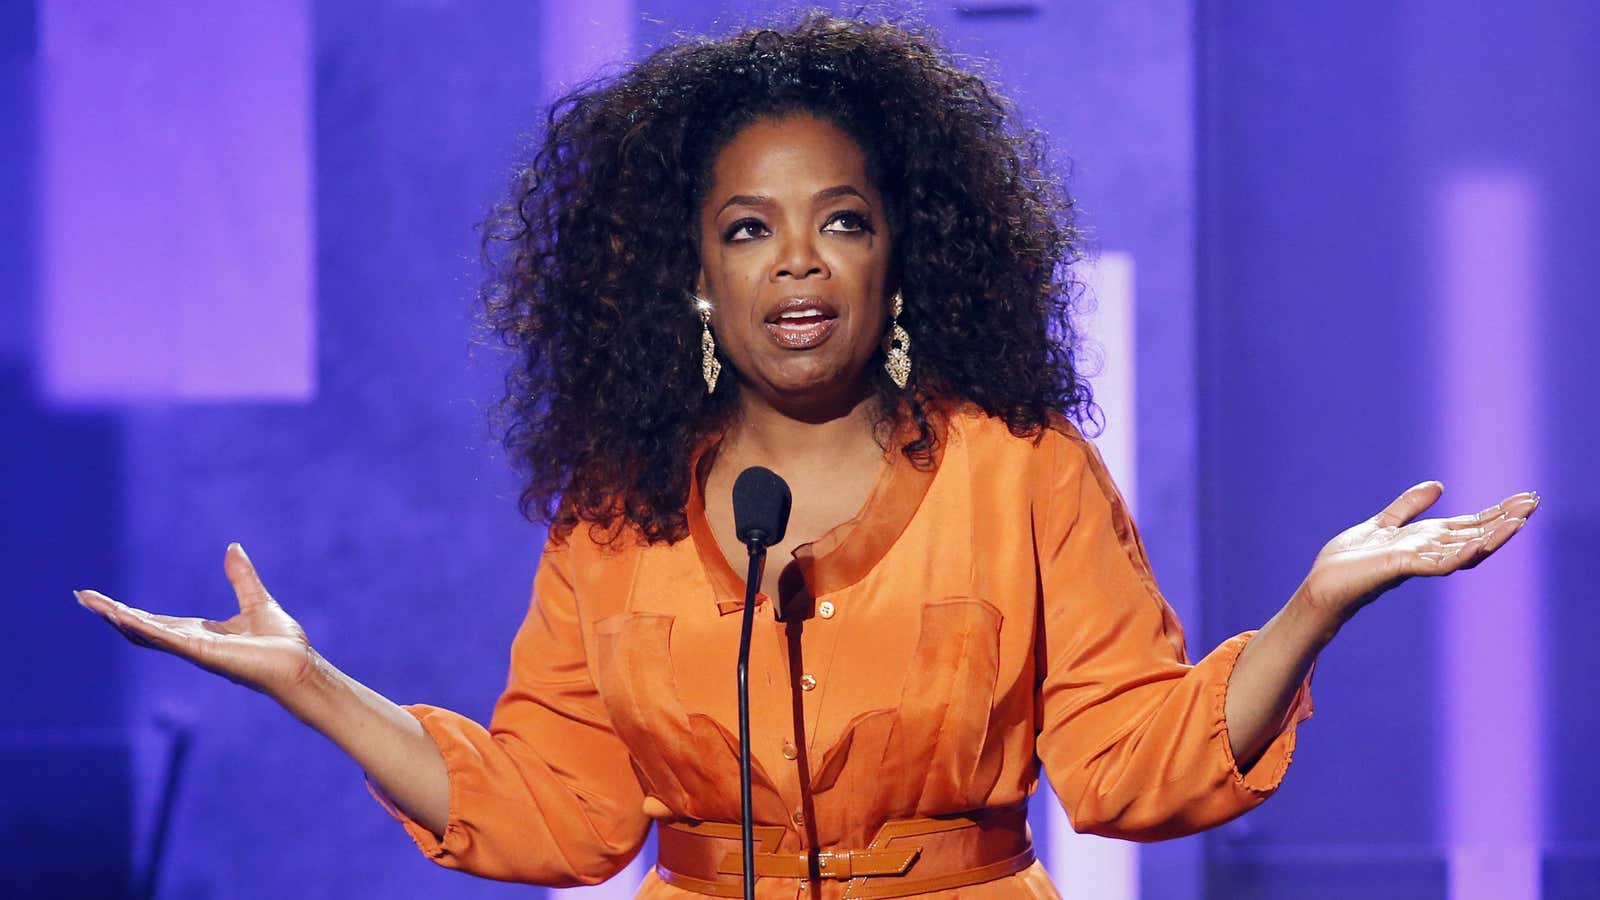 Management lessons from Oprah, drawn from the moment she knew it was time to shut down the Oprah Winfrey Show